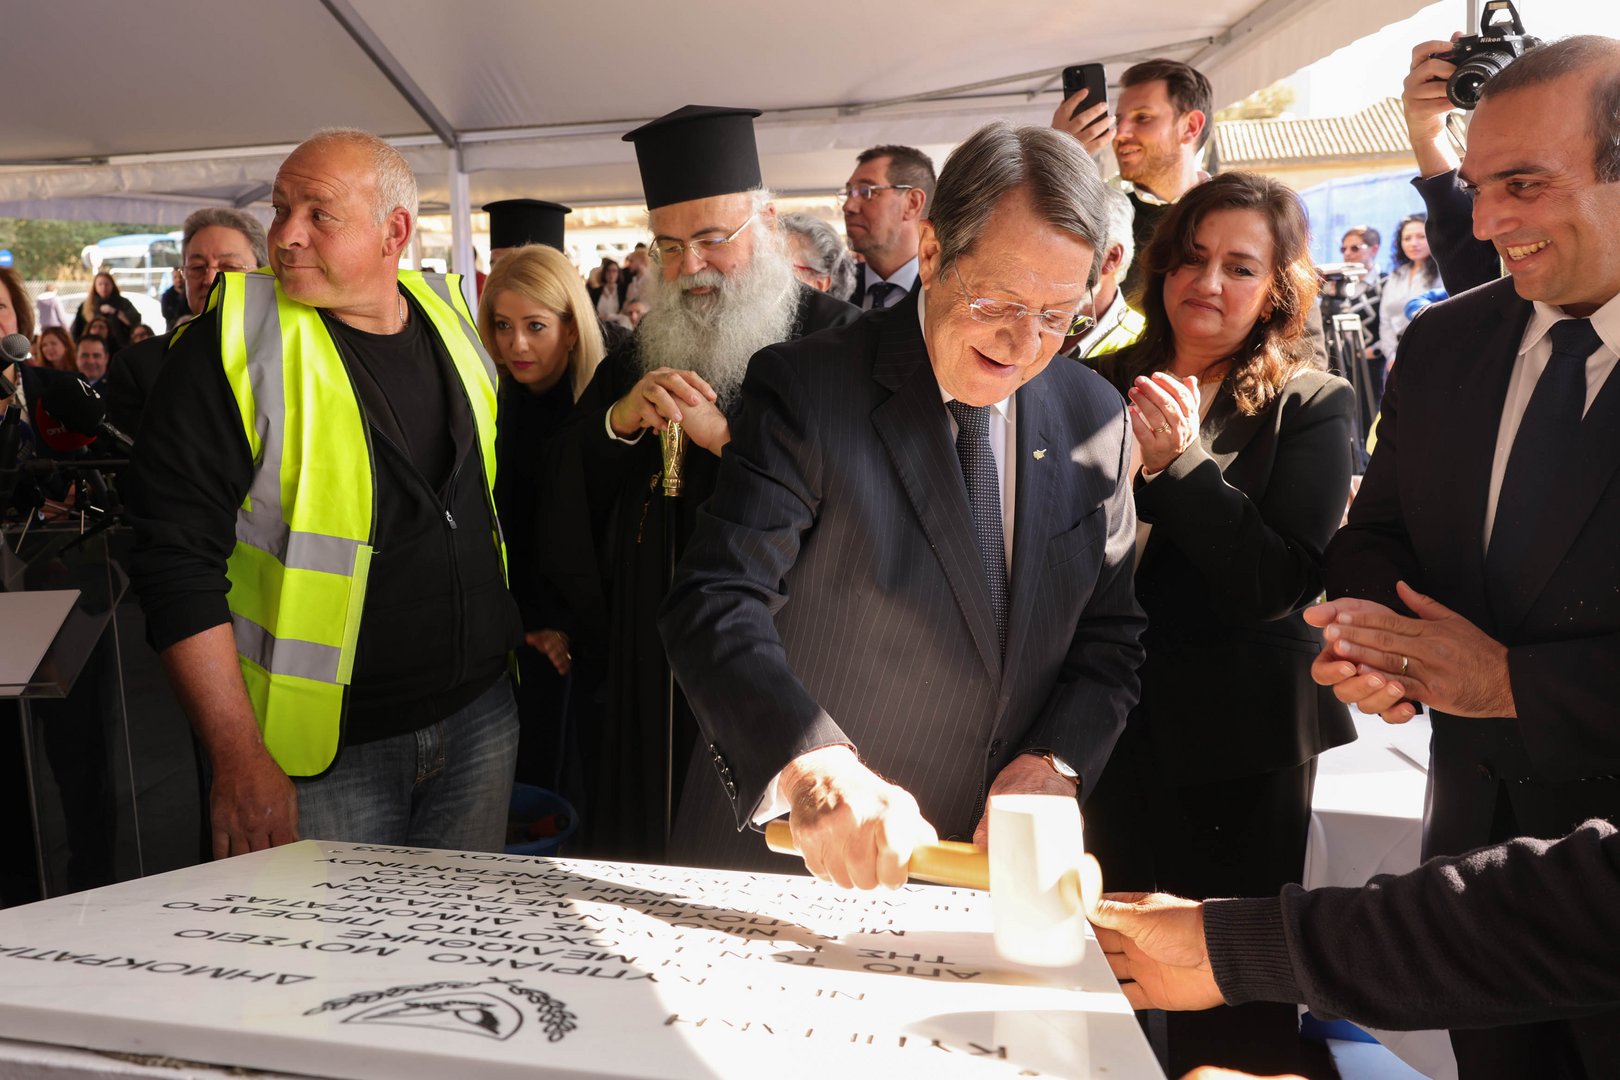 image Our View: Unfortunately, Anastasiades’ legacy speaks for itself